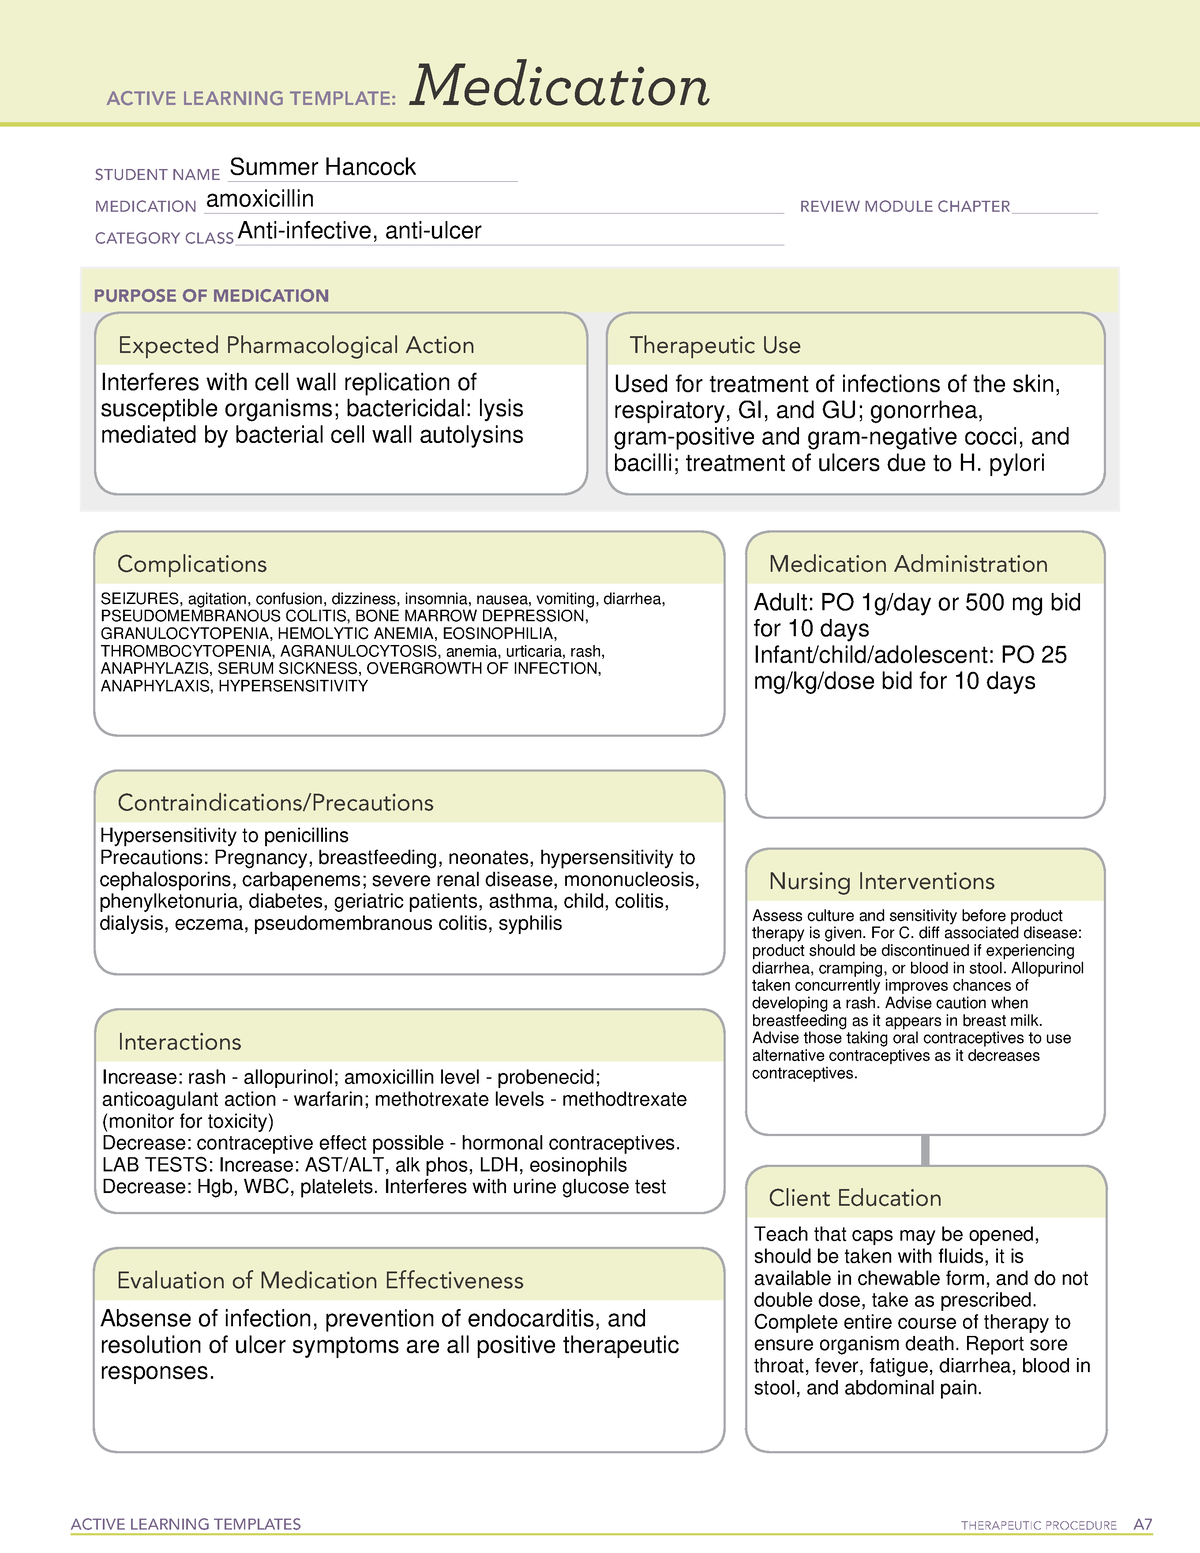 active-learning-template-amoxicillin-active-learning-templates-therapeutic-procedure-a